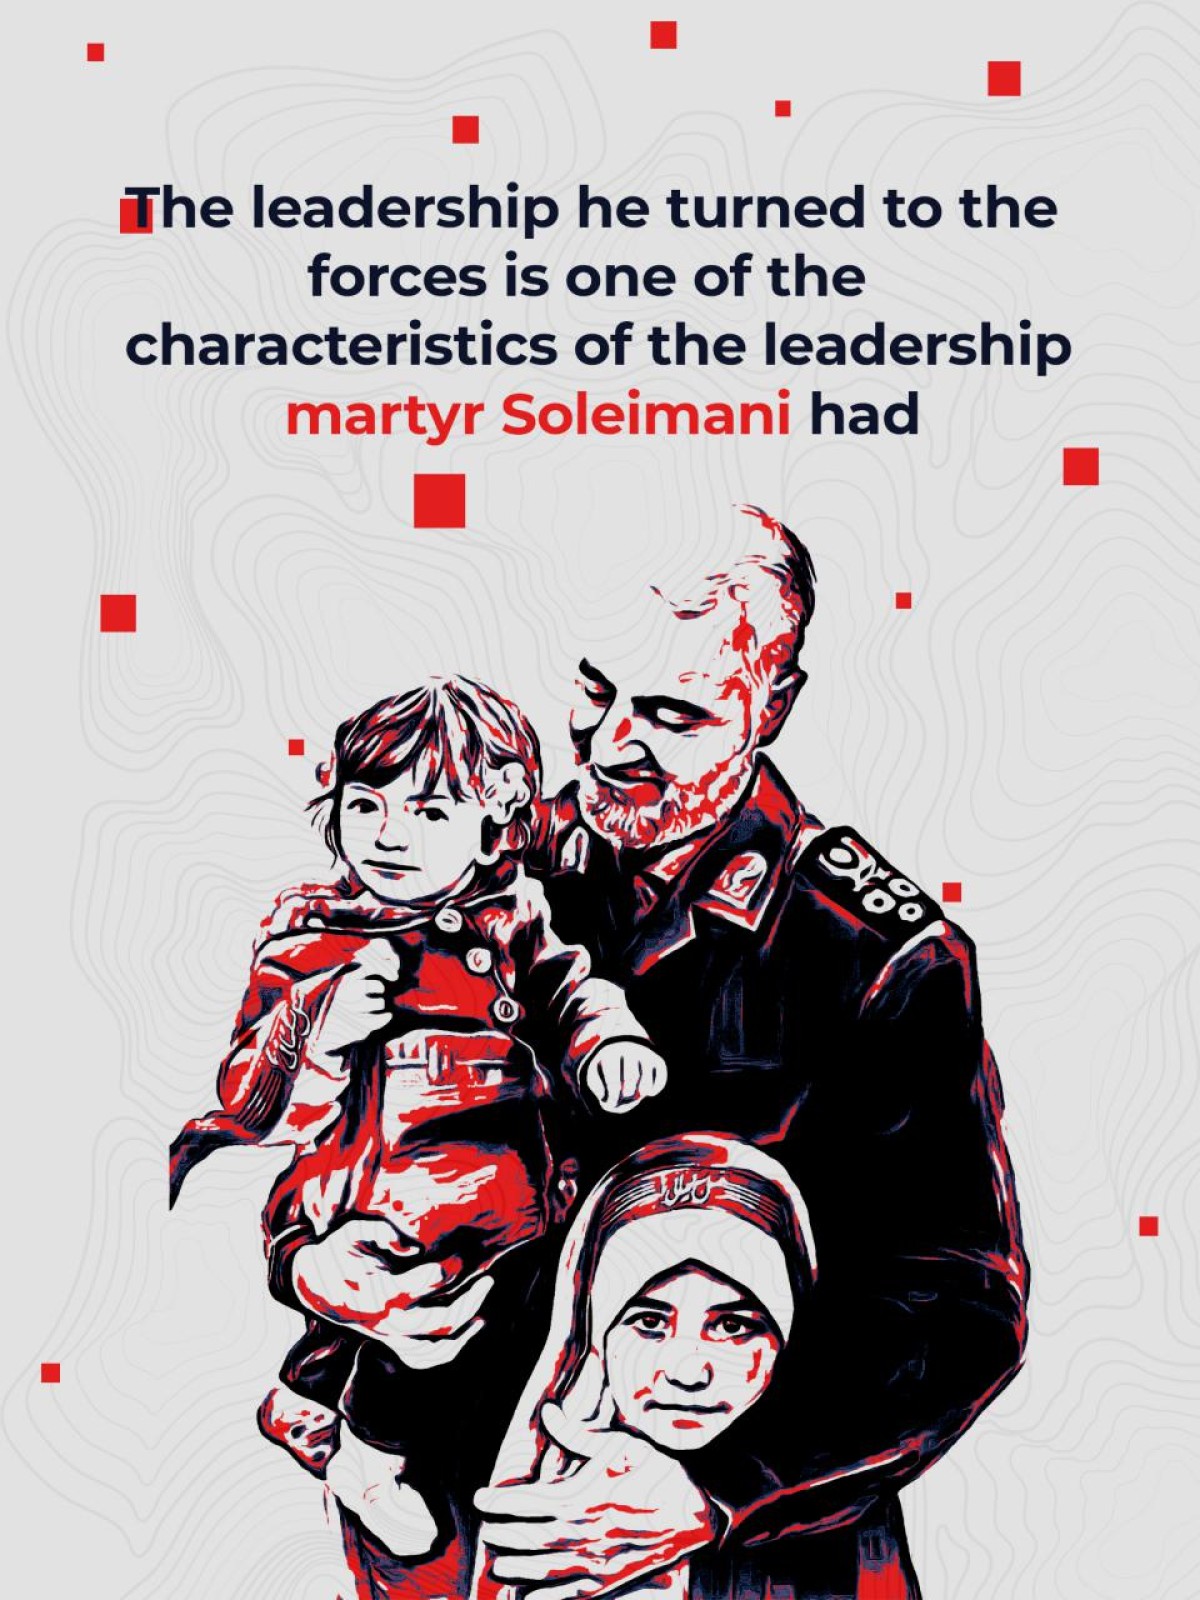 The leadership he turned to the forces is one of the characteristics of the leadership martyr Soleimani had